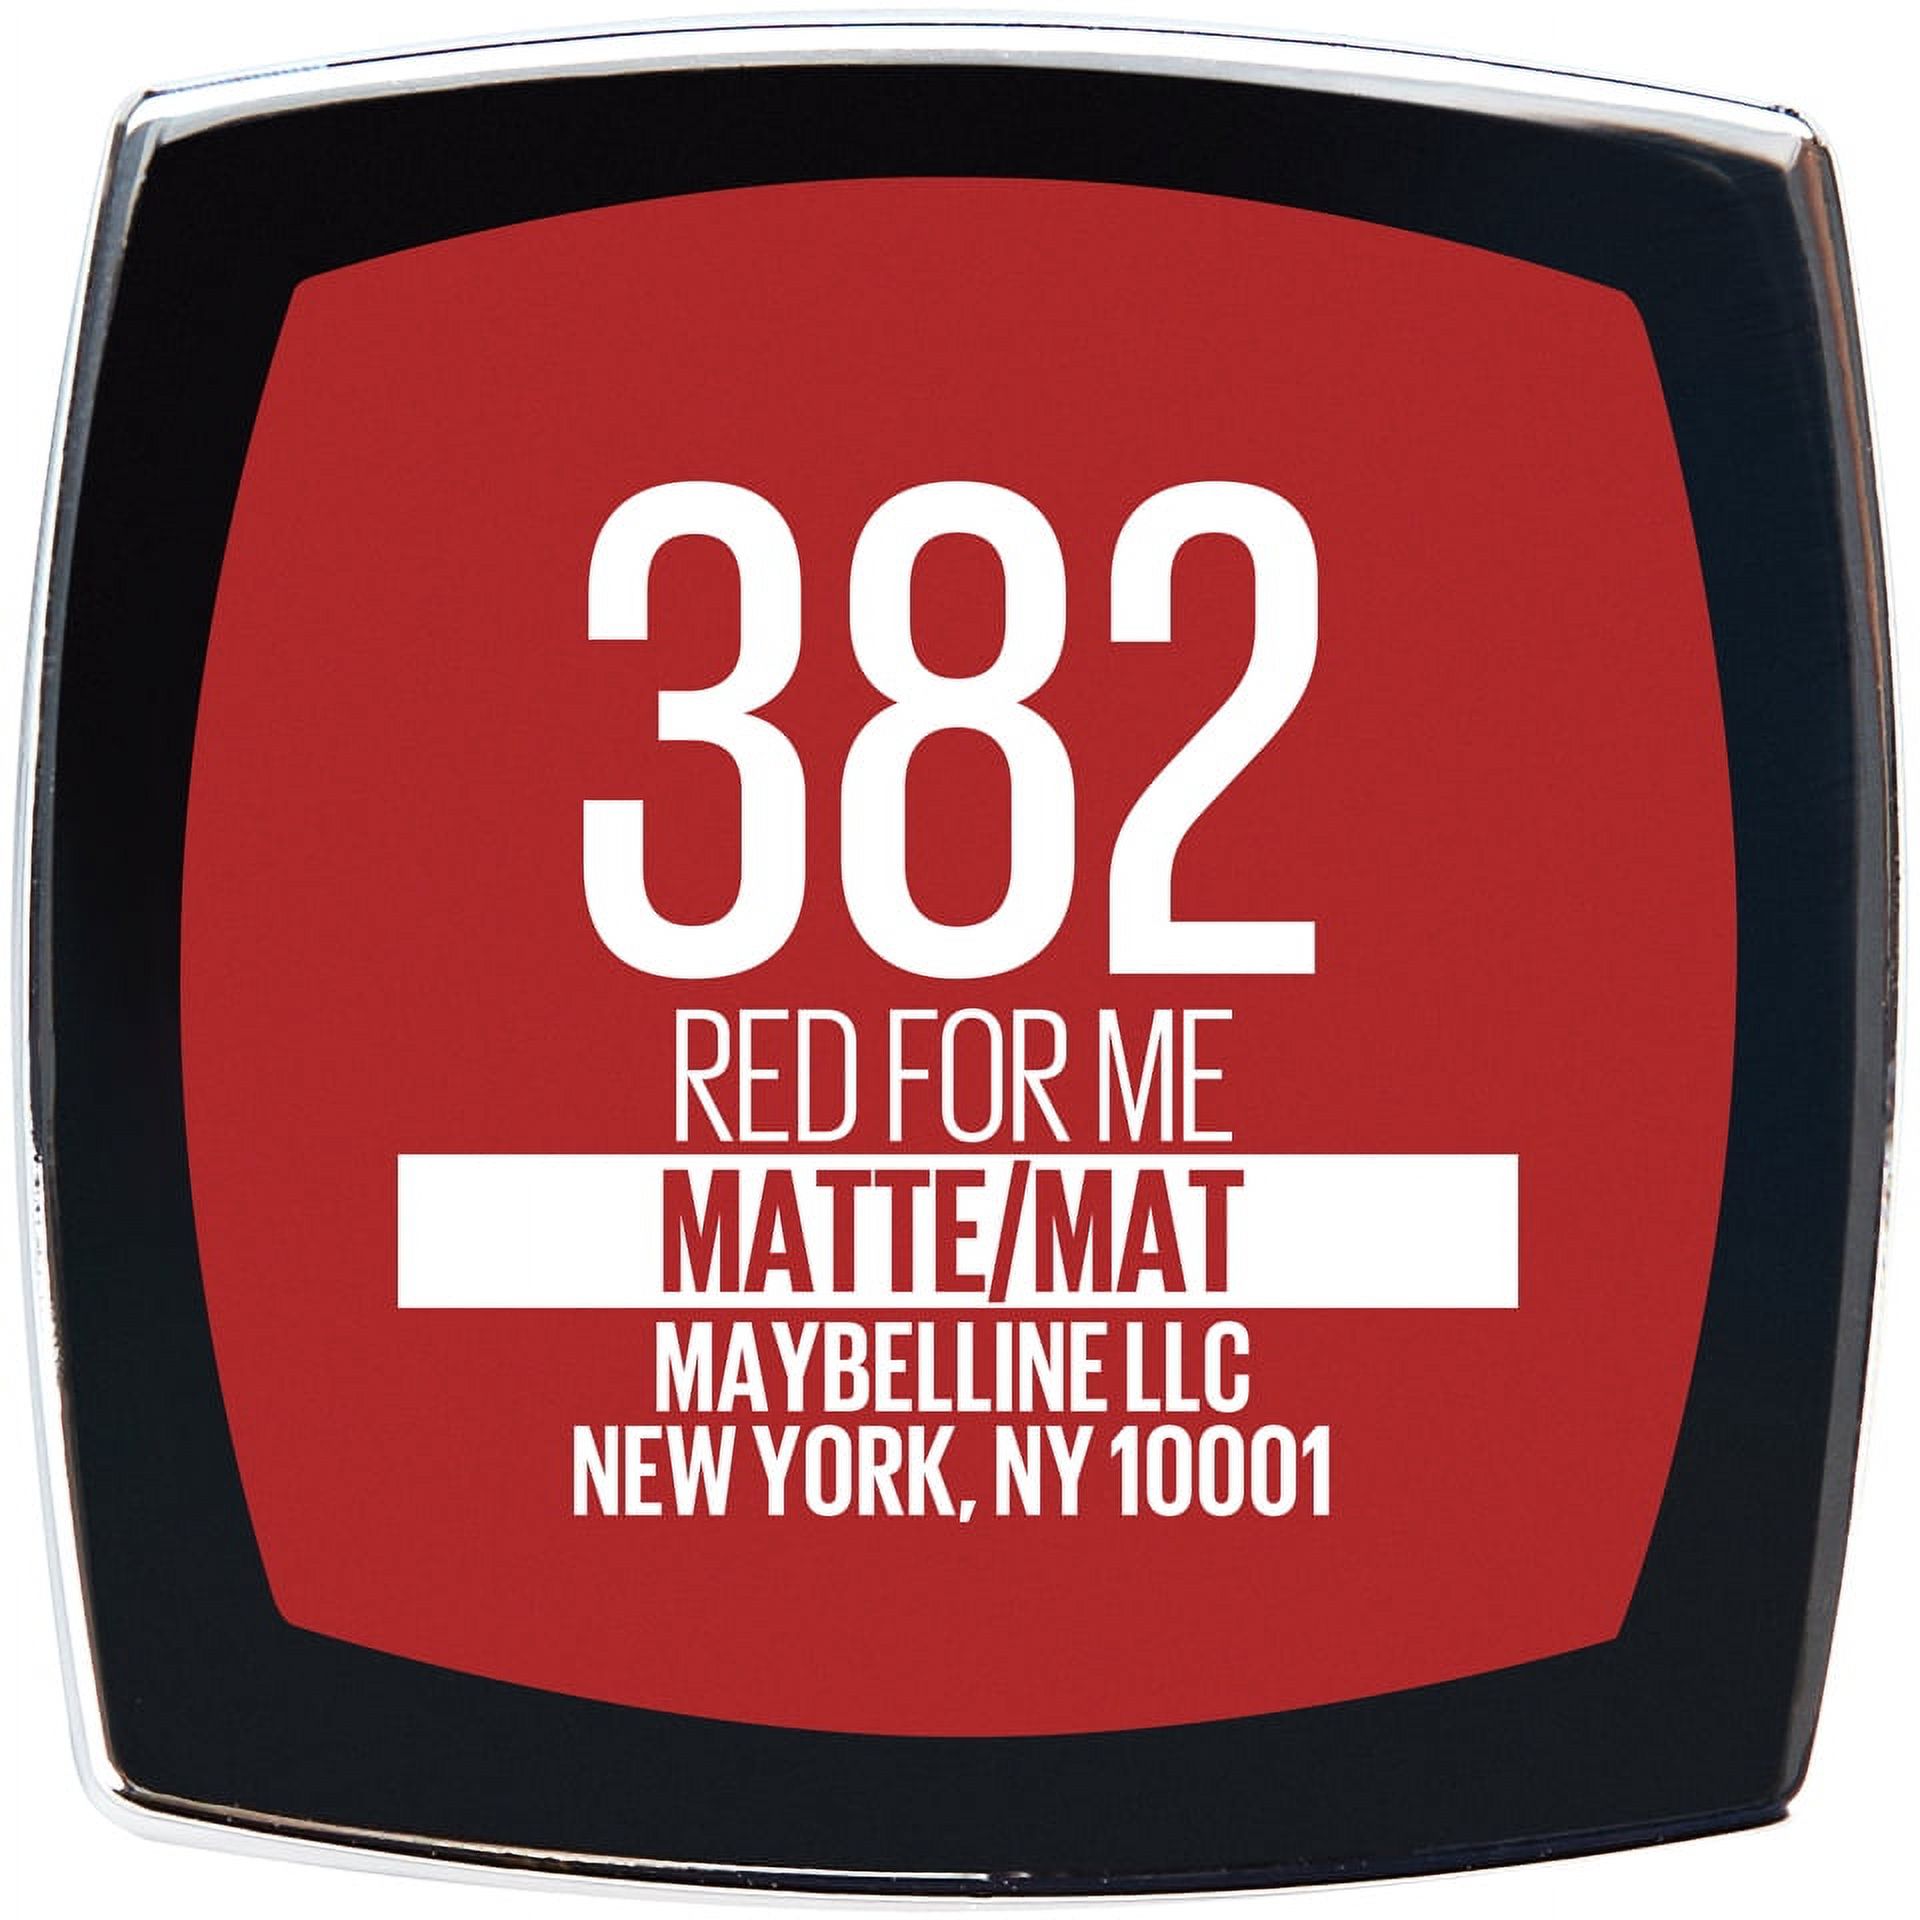 Maybelline Color Sensational Made For All Lipstick, Red For Me - image 5 of 13